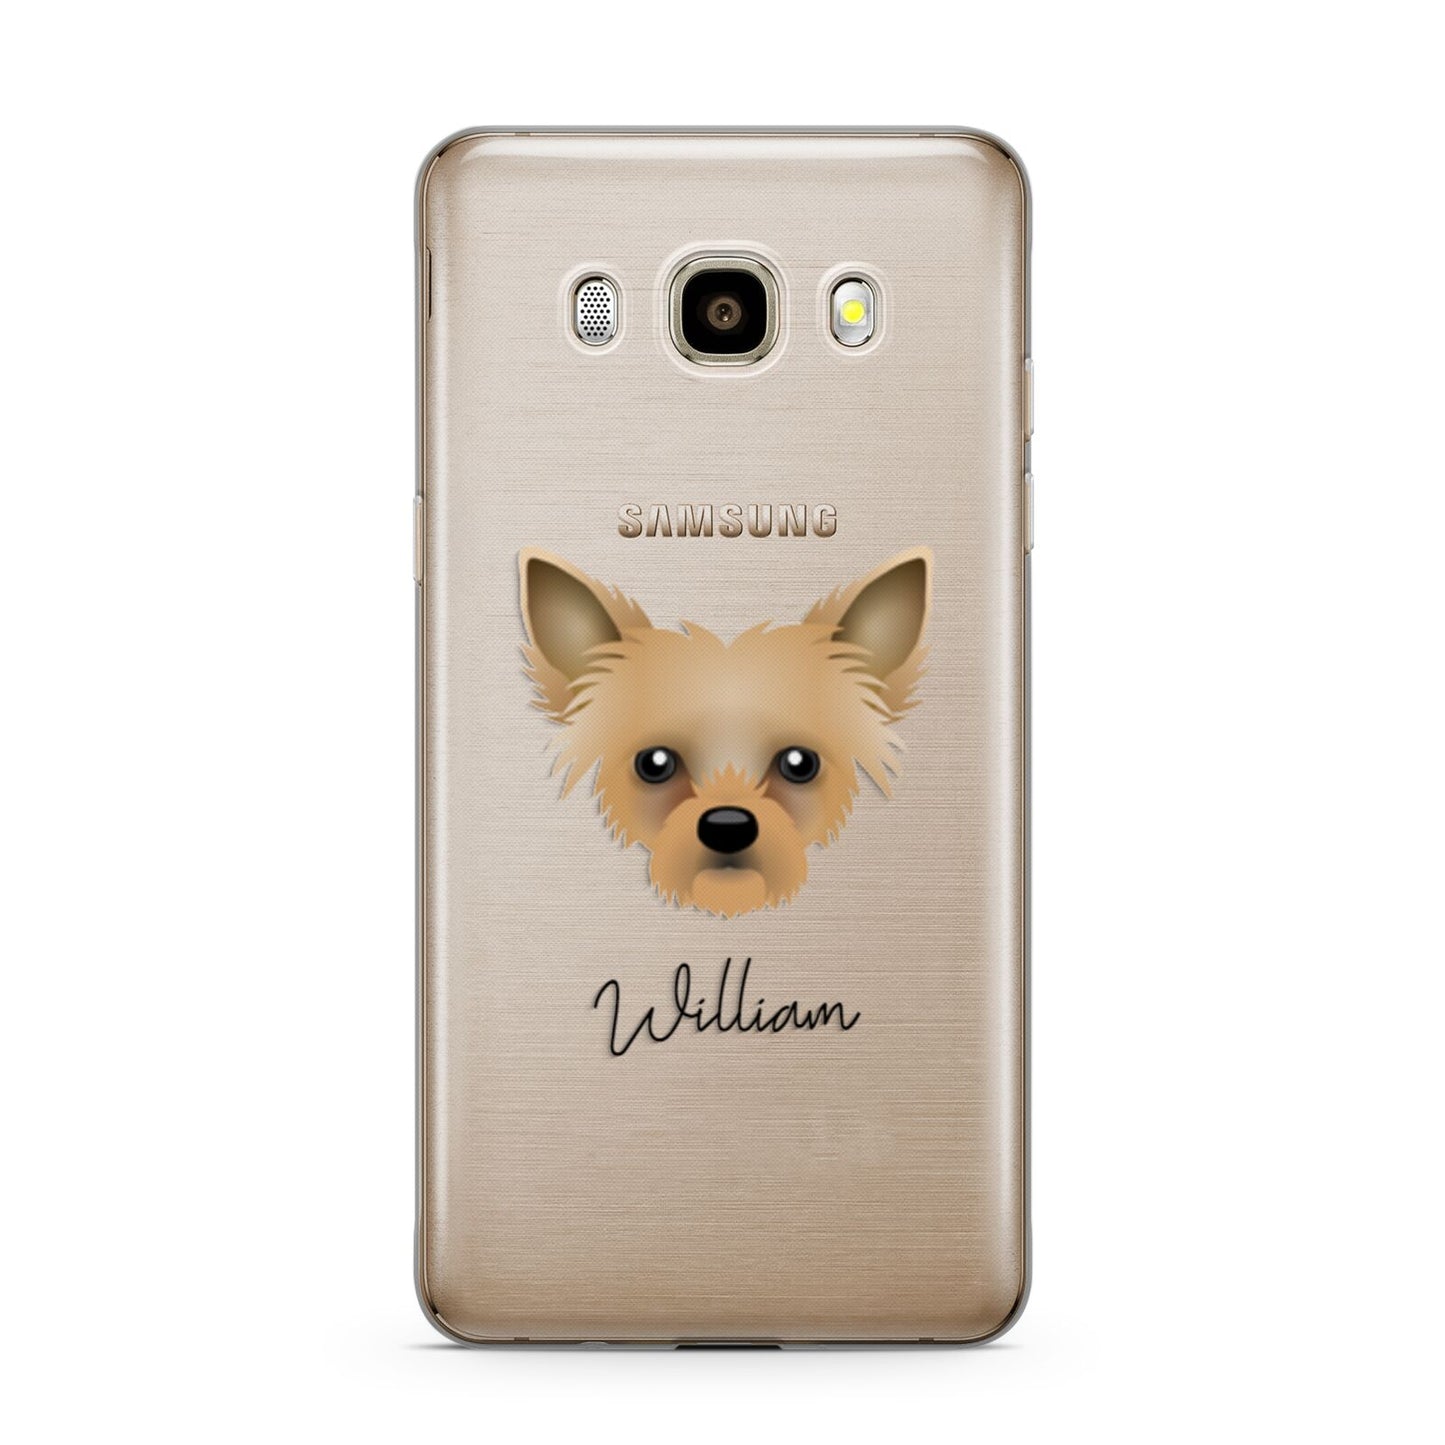 Chipoo Personalised Samsung Galaxy J7 2016 Case on gold phone